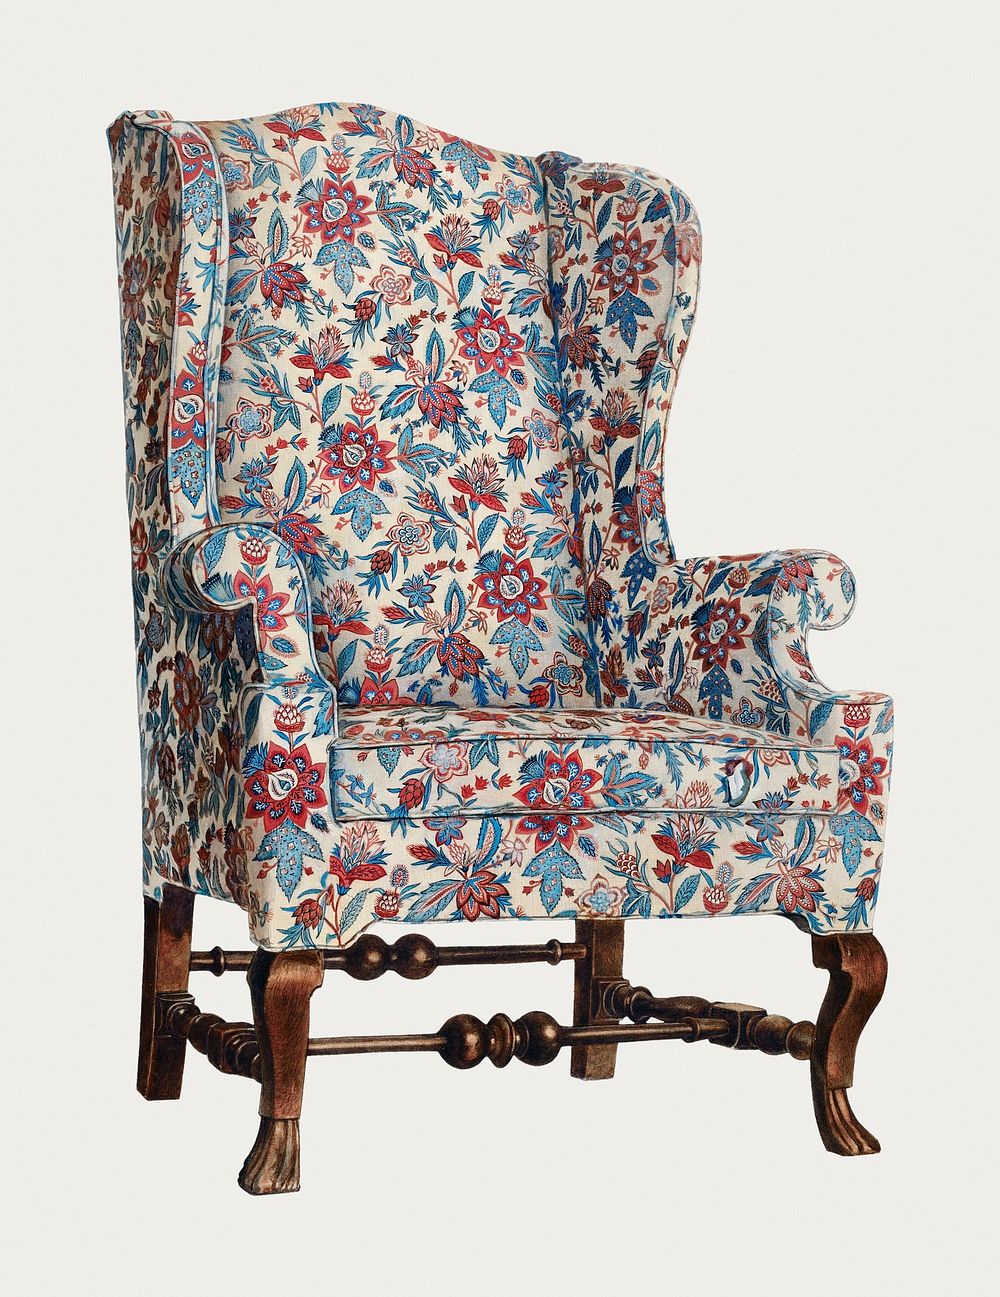 Vintage wing chair psd illustration, remixed from the artwork by Rolland Livingstone